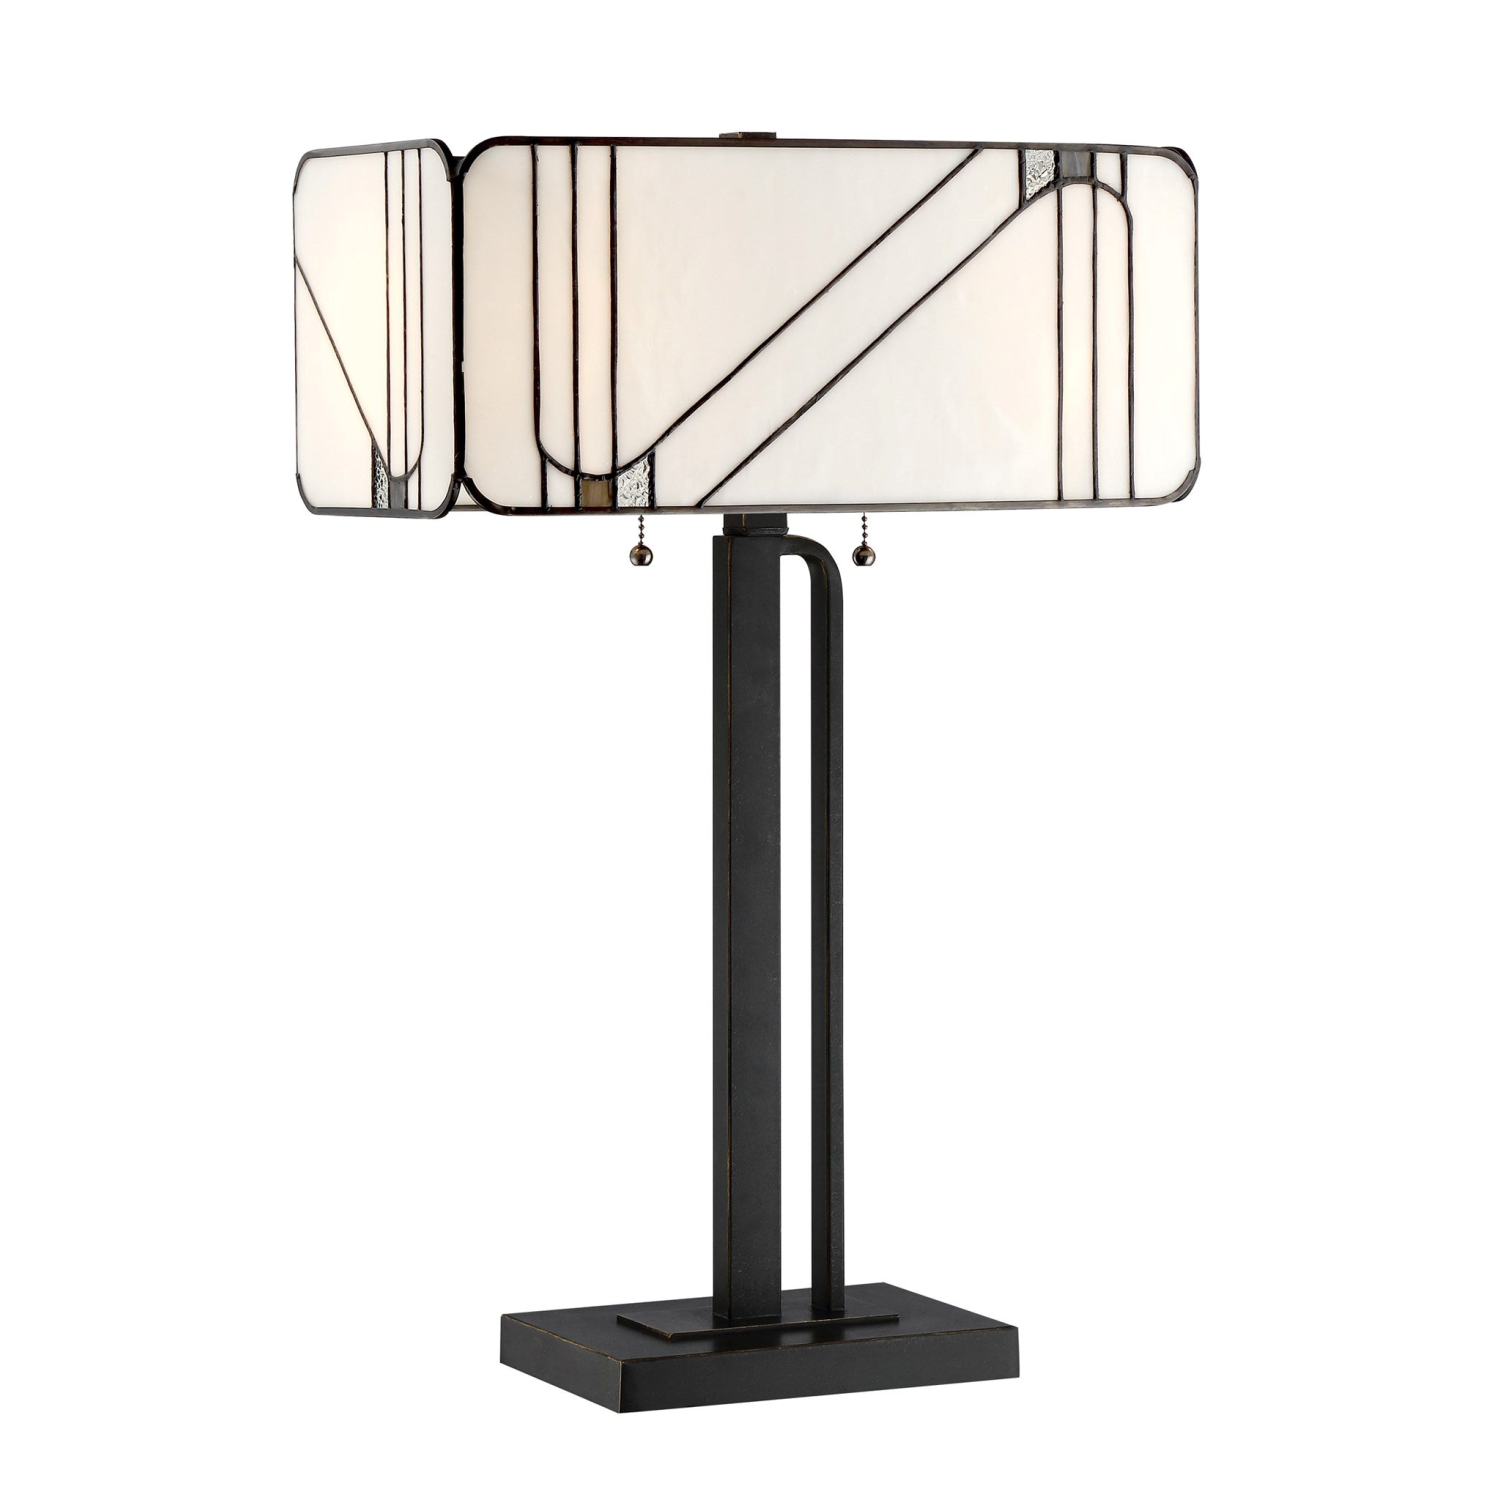 Tulani Table Lamp Picture with White Background